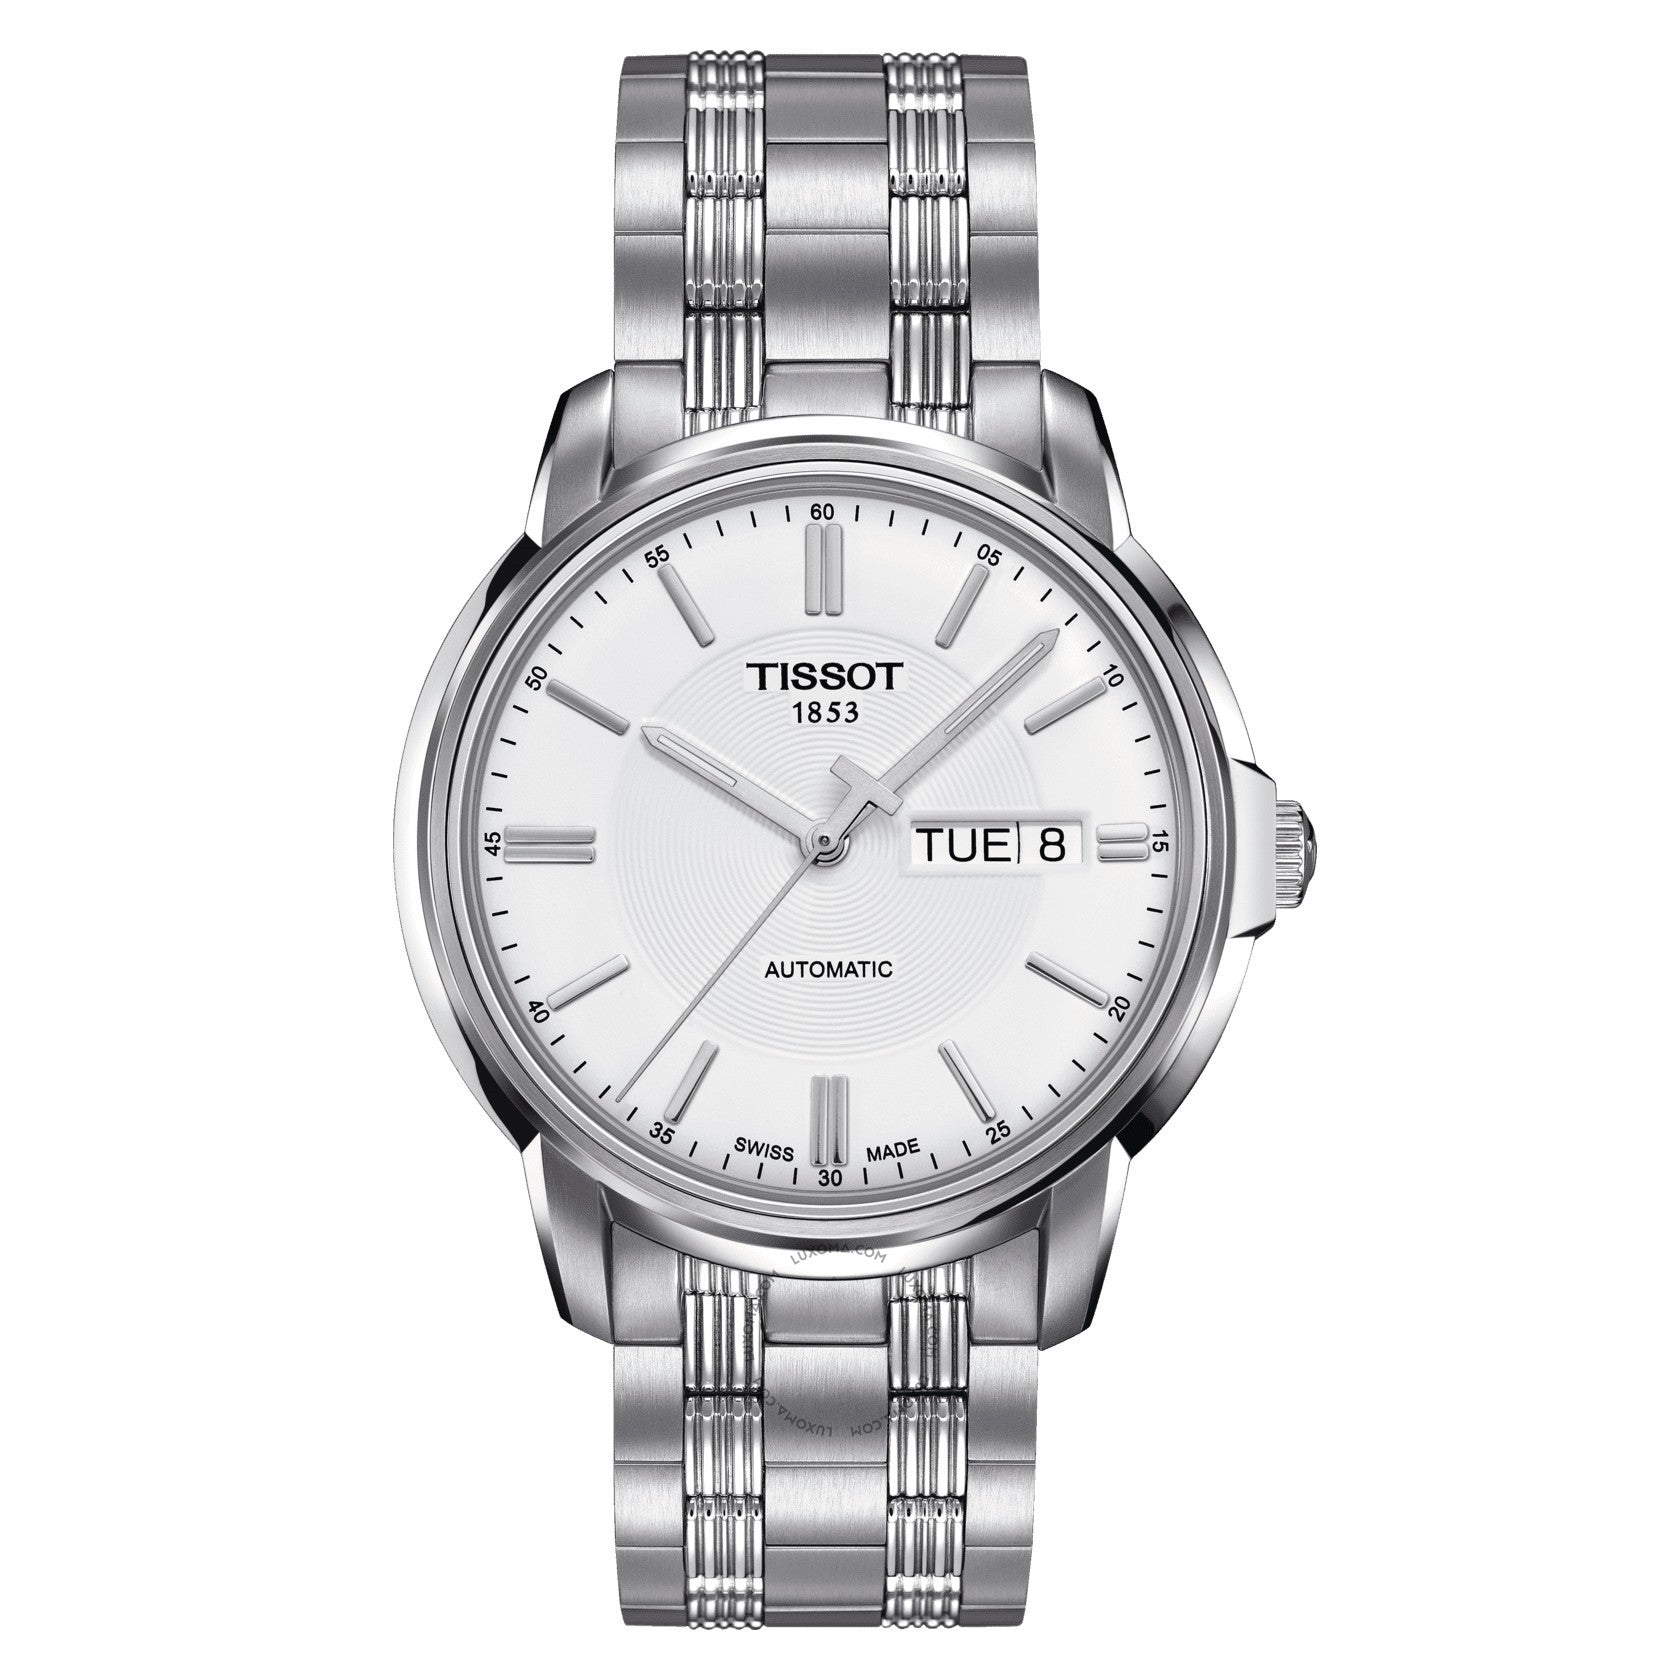 Tissot Automatic III Automatic White Dial Men's Watch T065.430.11.031.00